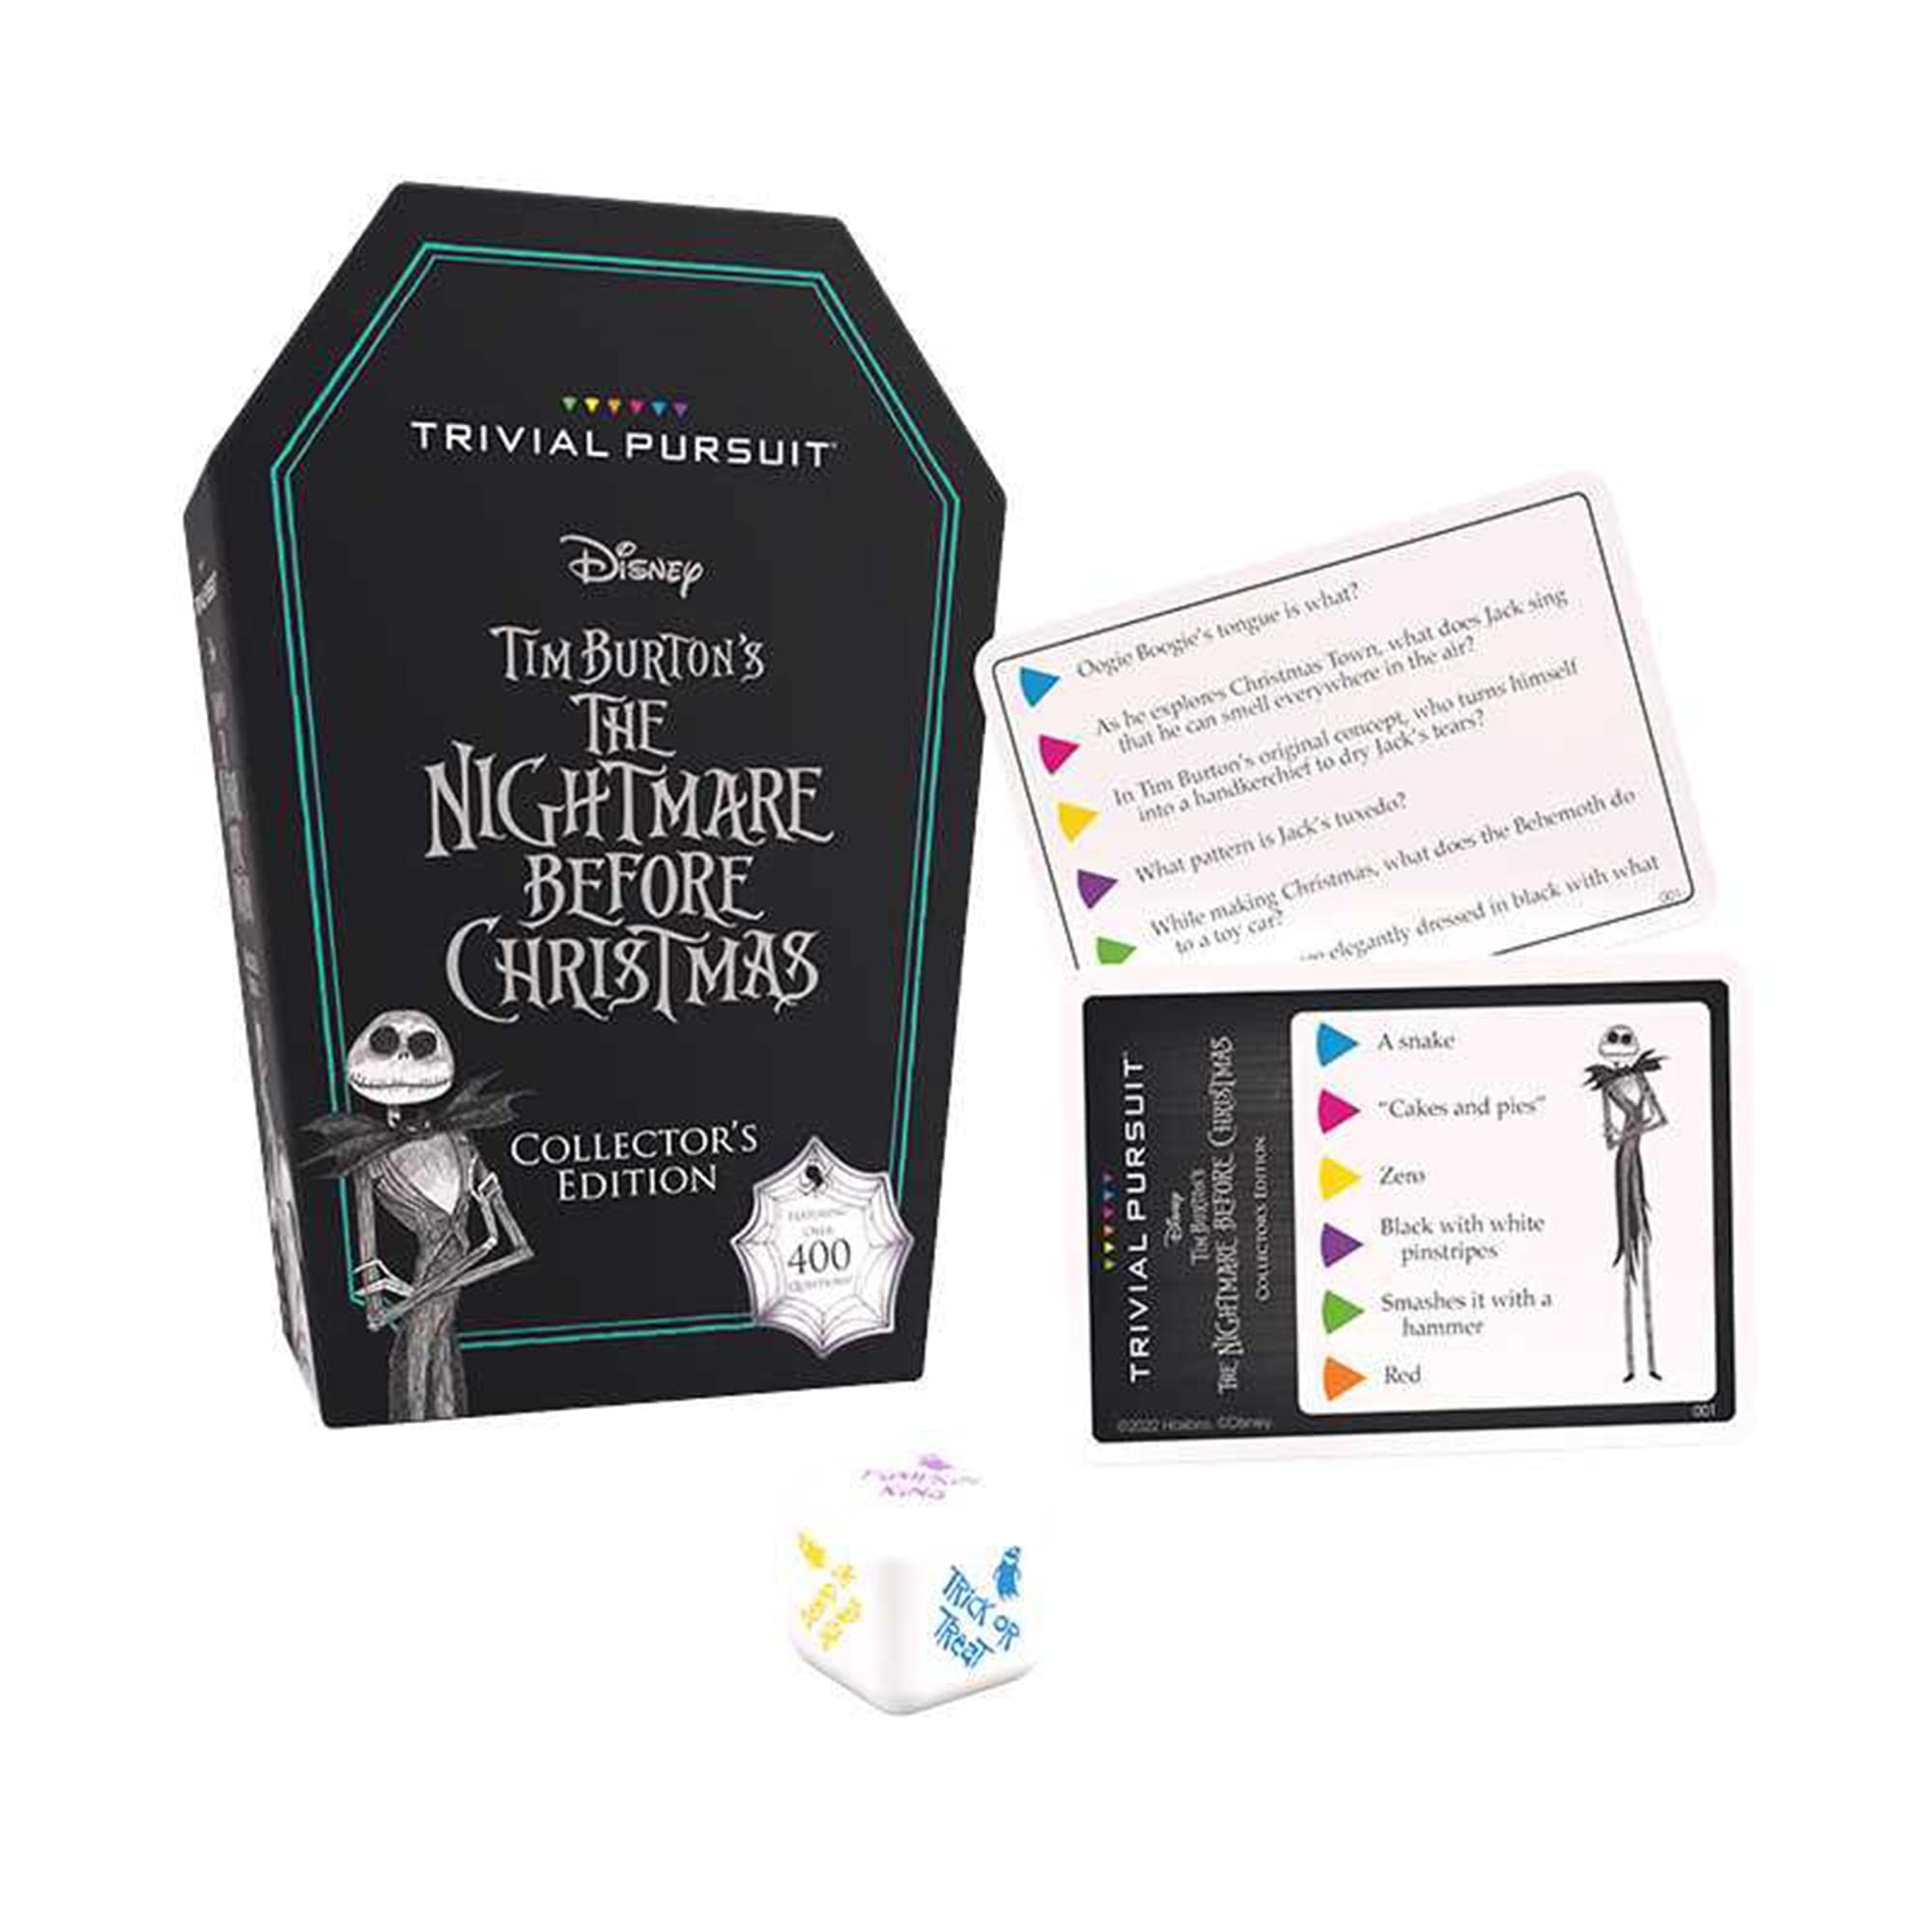 TRIVIAL PURSUIT: Disney Tim Burton’s The Nightmare Before Christmas | Collectible Trivia Board Game Featuring 420 Questions from Classic Stopmotion Film | Officially-Licensed Disney Game & Merchandise